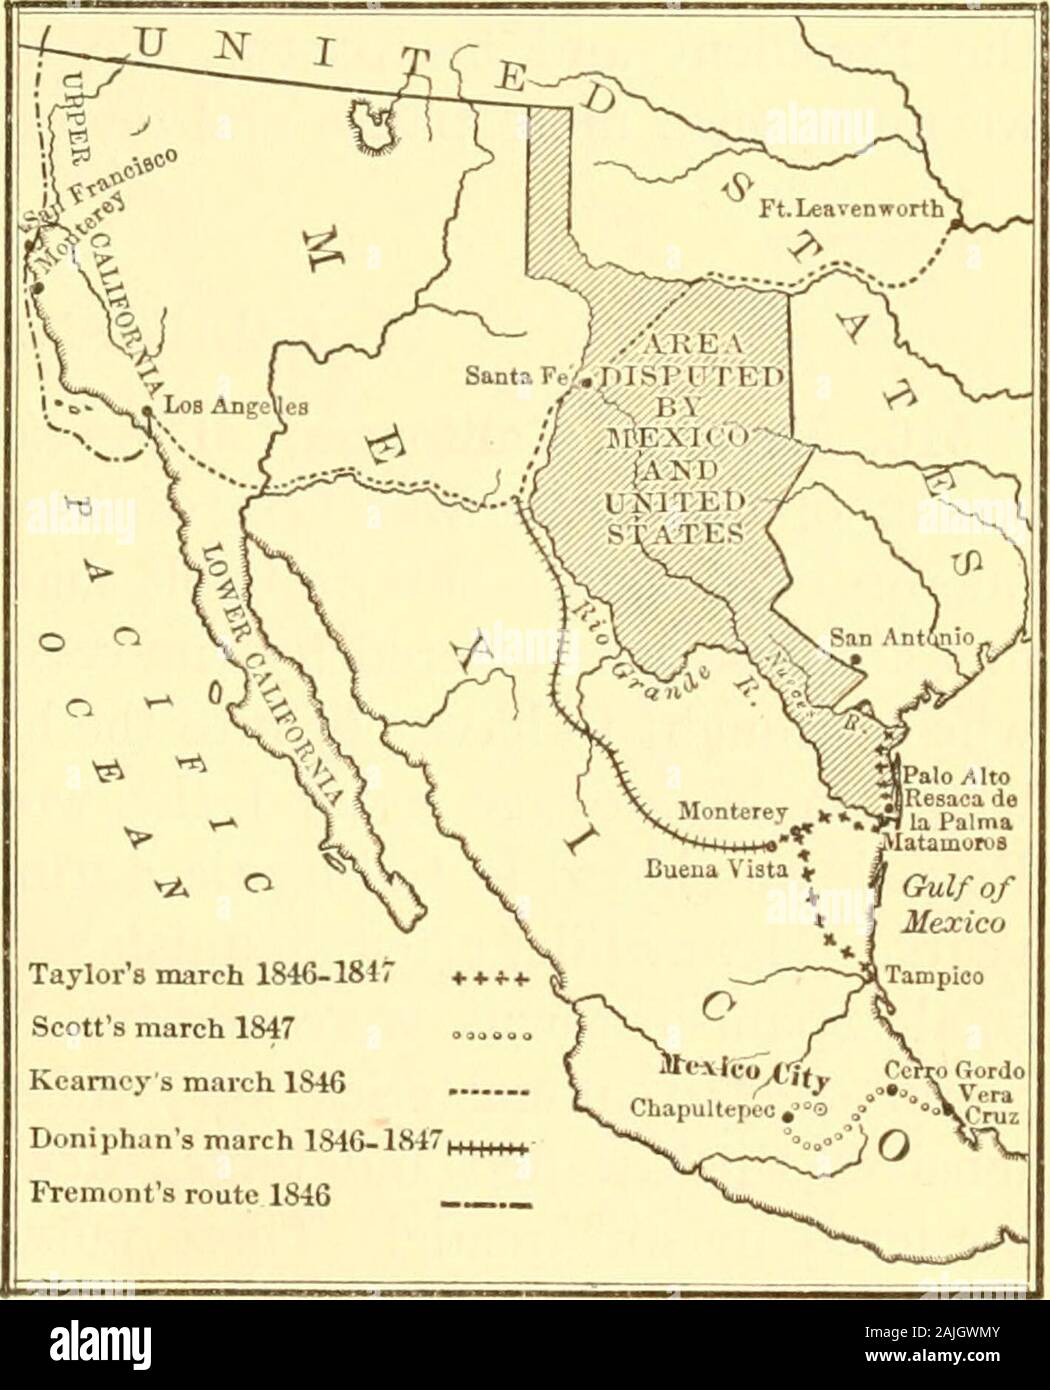 An American history . by fixing the boundary atthe forty-ninth parallel. Congress advised Polk to acceptthe compromise, and by a treaty drawn up in June, 1846,the long dispute wasfinally settled.^ 515. The MexicanWar. Turning uponMexico, the Ameri-cans now demon-strated their instinc-tive military talent.Taylors campaign innorthern Mexico isone of the most bril-liant episodes in ourmihtary annals. Hewas uniformly suc-cessful againstgreatly superior num-bers. The climax ofhis advance was acrushing defeat ofthe Mexicans in thehard-fought battle of Buena Vista, February 22-23, 1847. Equally remar Stock Photo